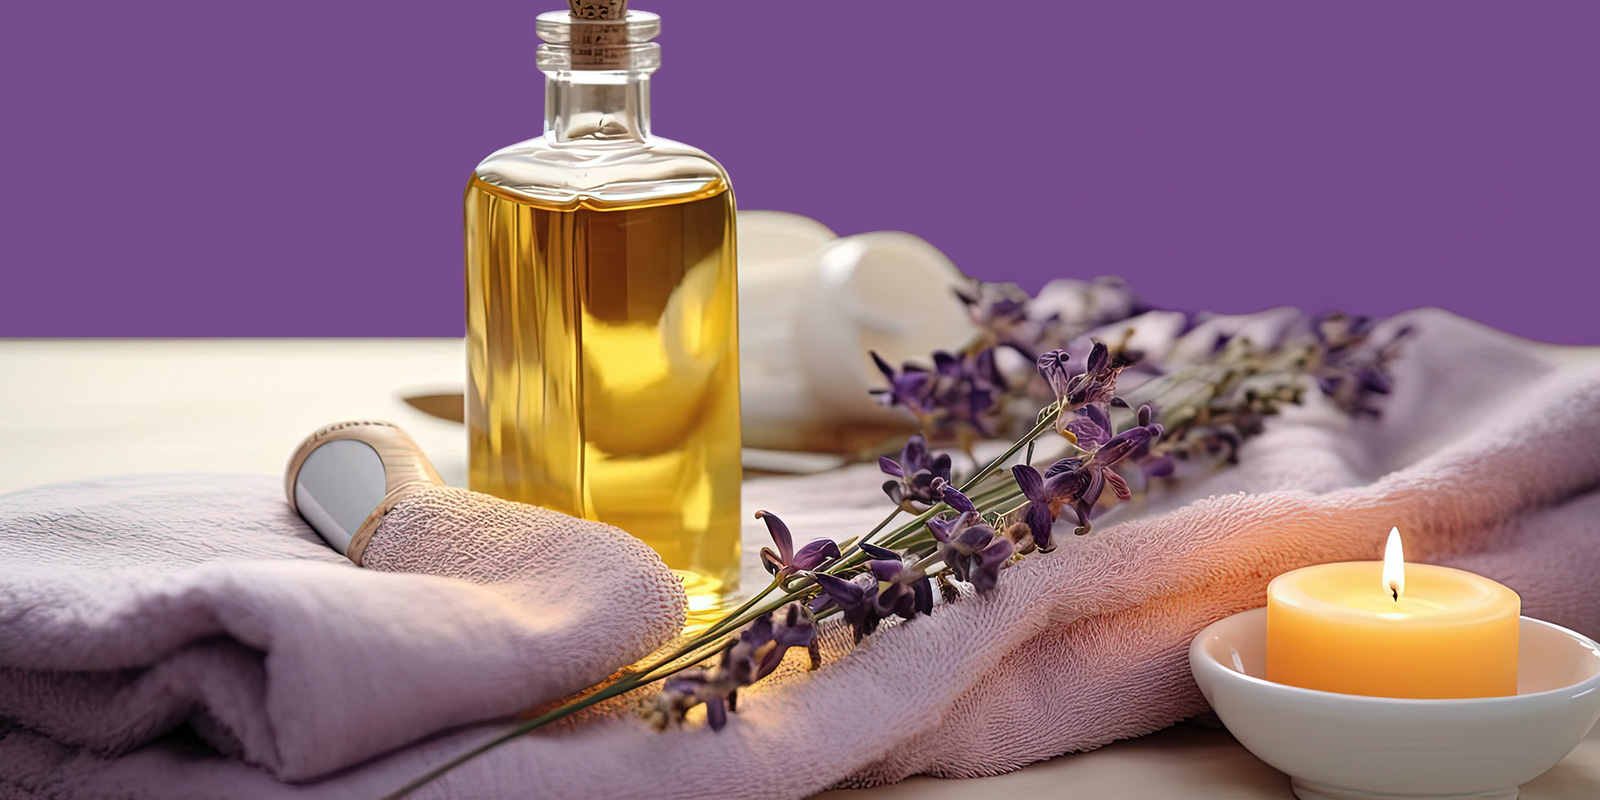 Aromatherapy Massage: Benefits for Health and Relaxation